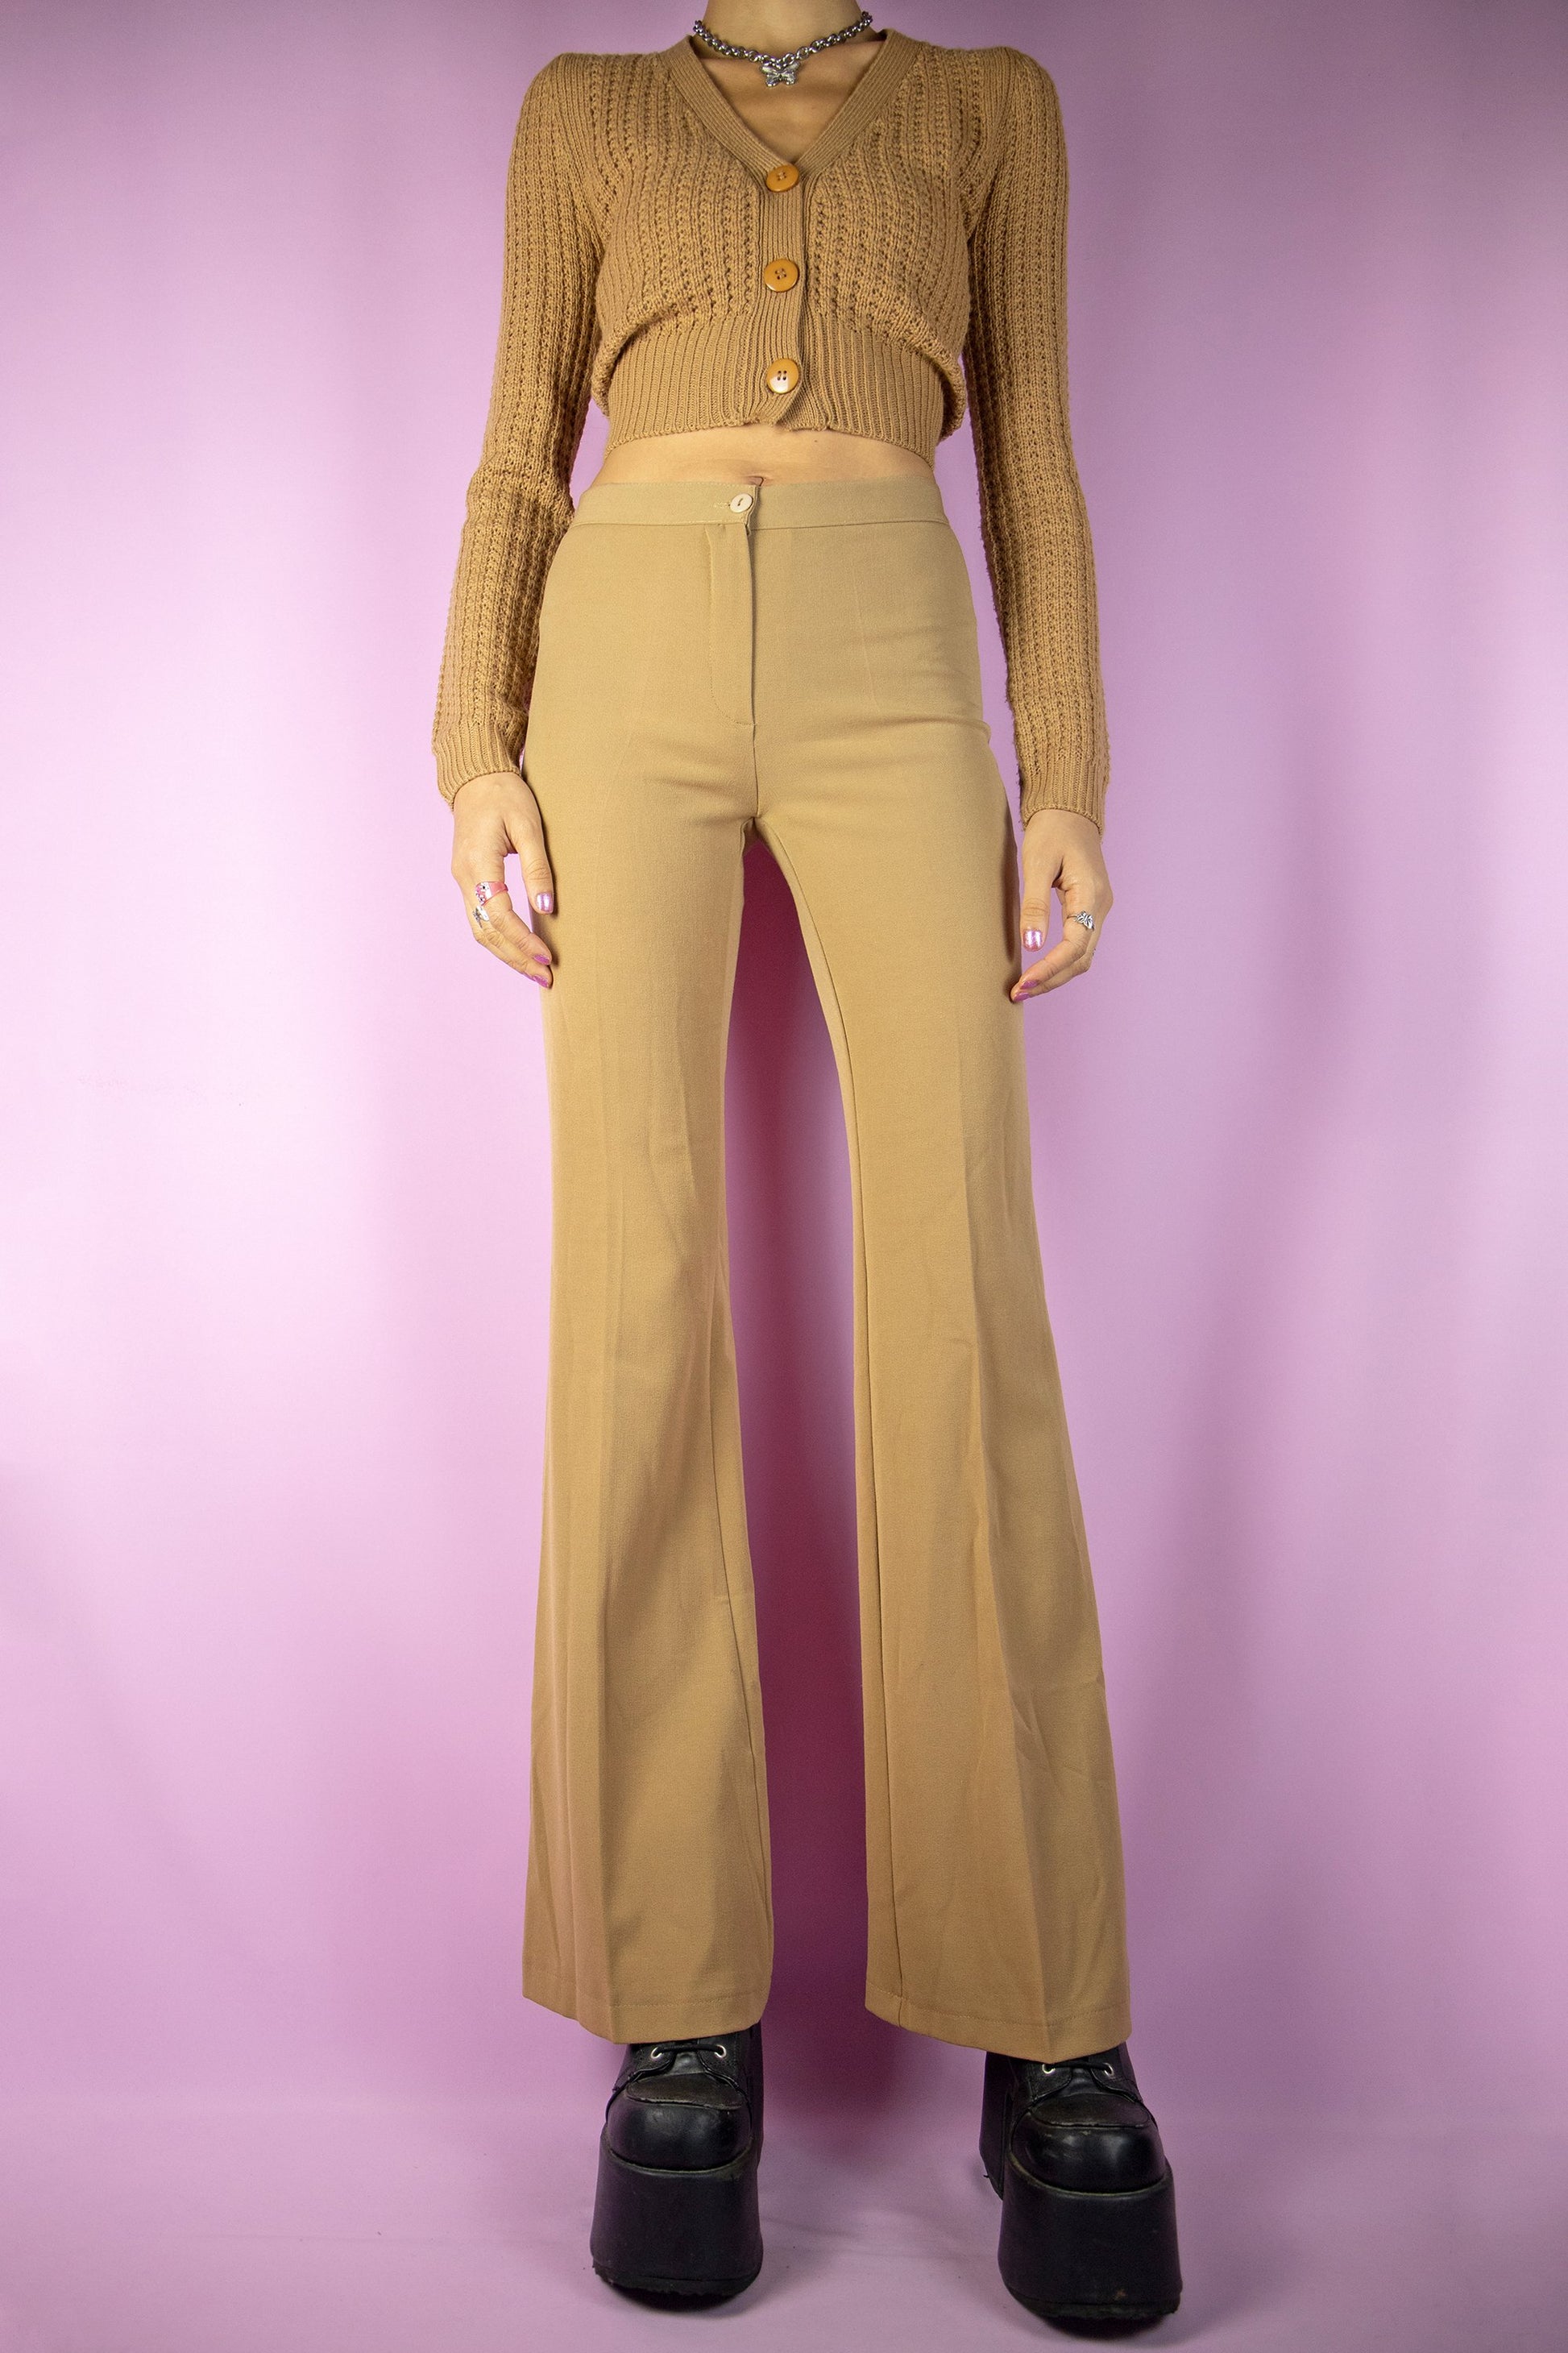 The Vintage Y2K Brown Stretch Flare Pants are light brown stretchy flared trousers. These super cute cyber fairy grunge pants are from the early 2000s.